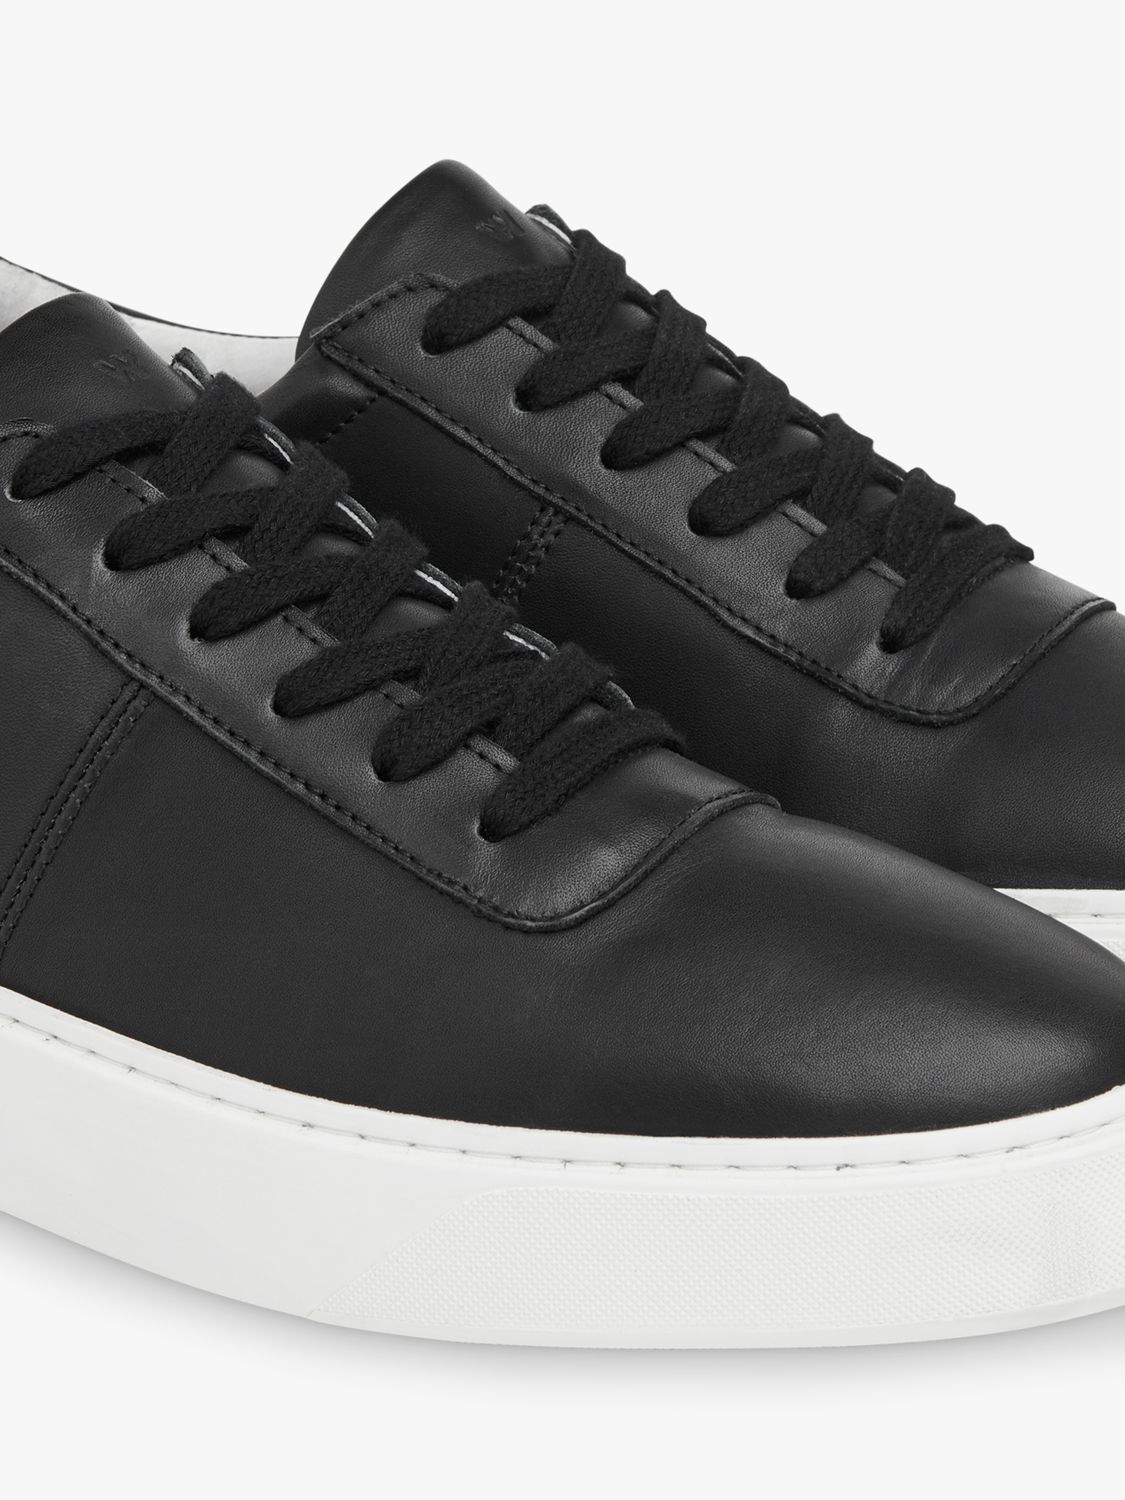 Whistles Kalie Leather Deep Sole Trainers, Black at John Lewis & Partners